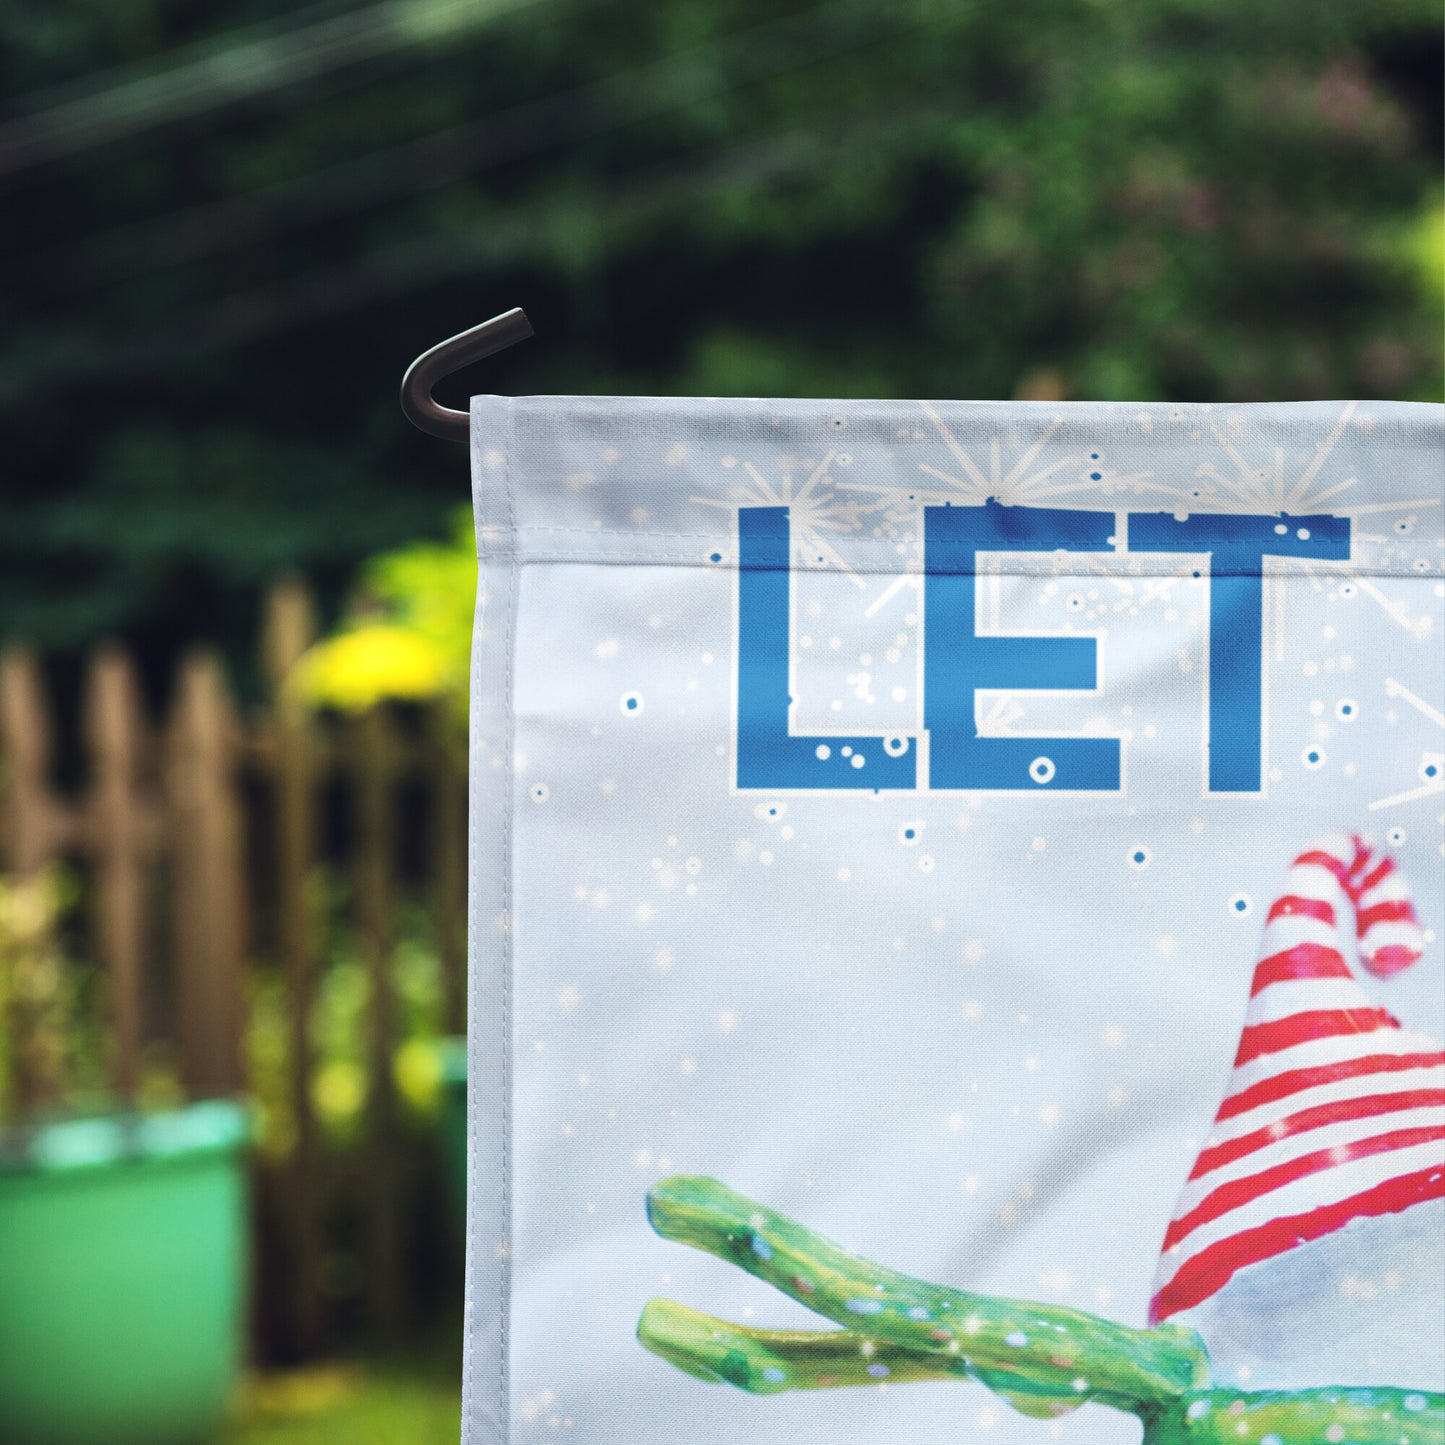 Let It Snow! Yard Flag - Signs and Seasons Gifts